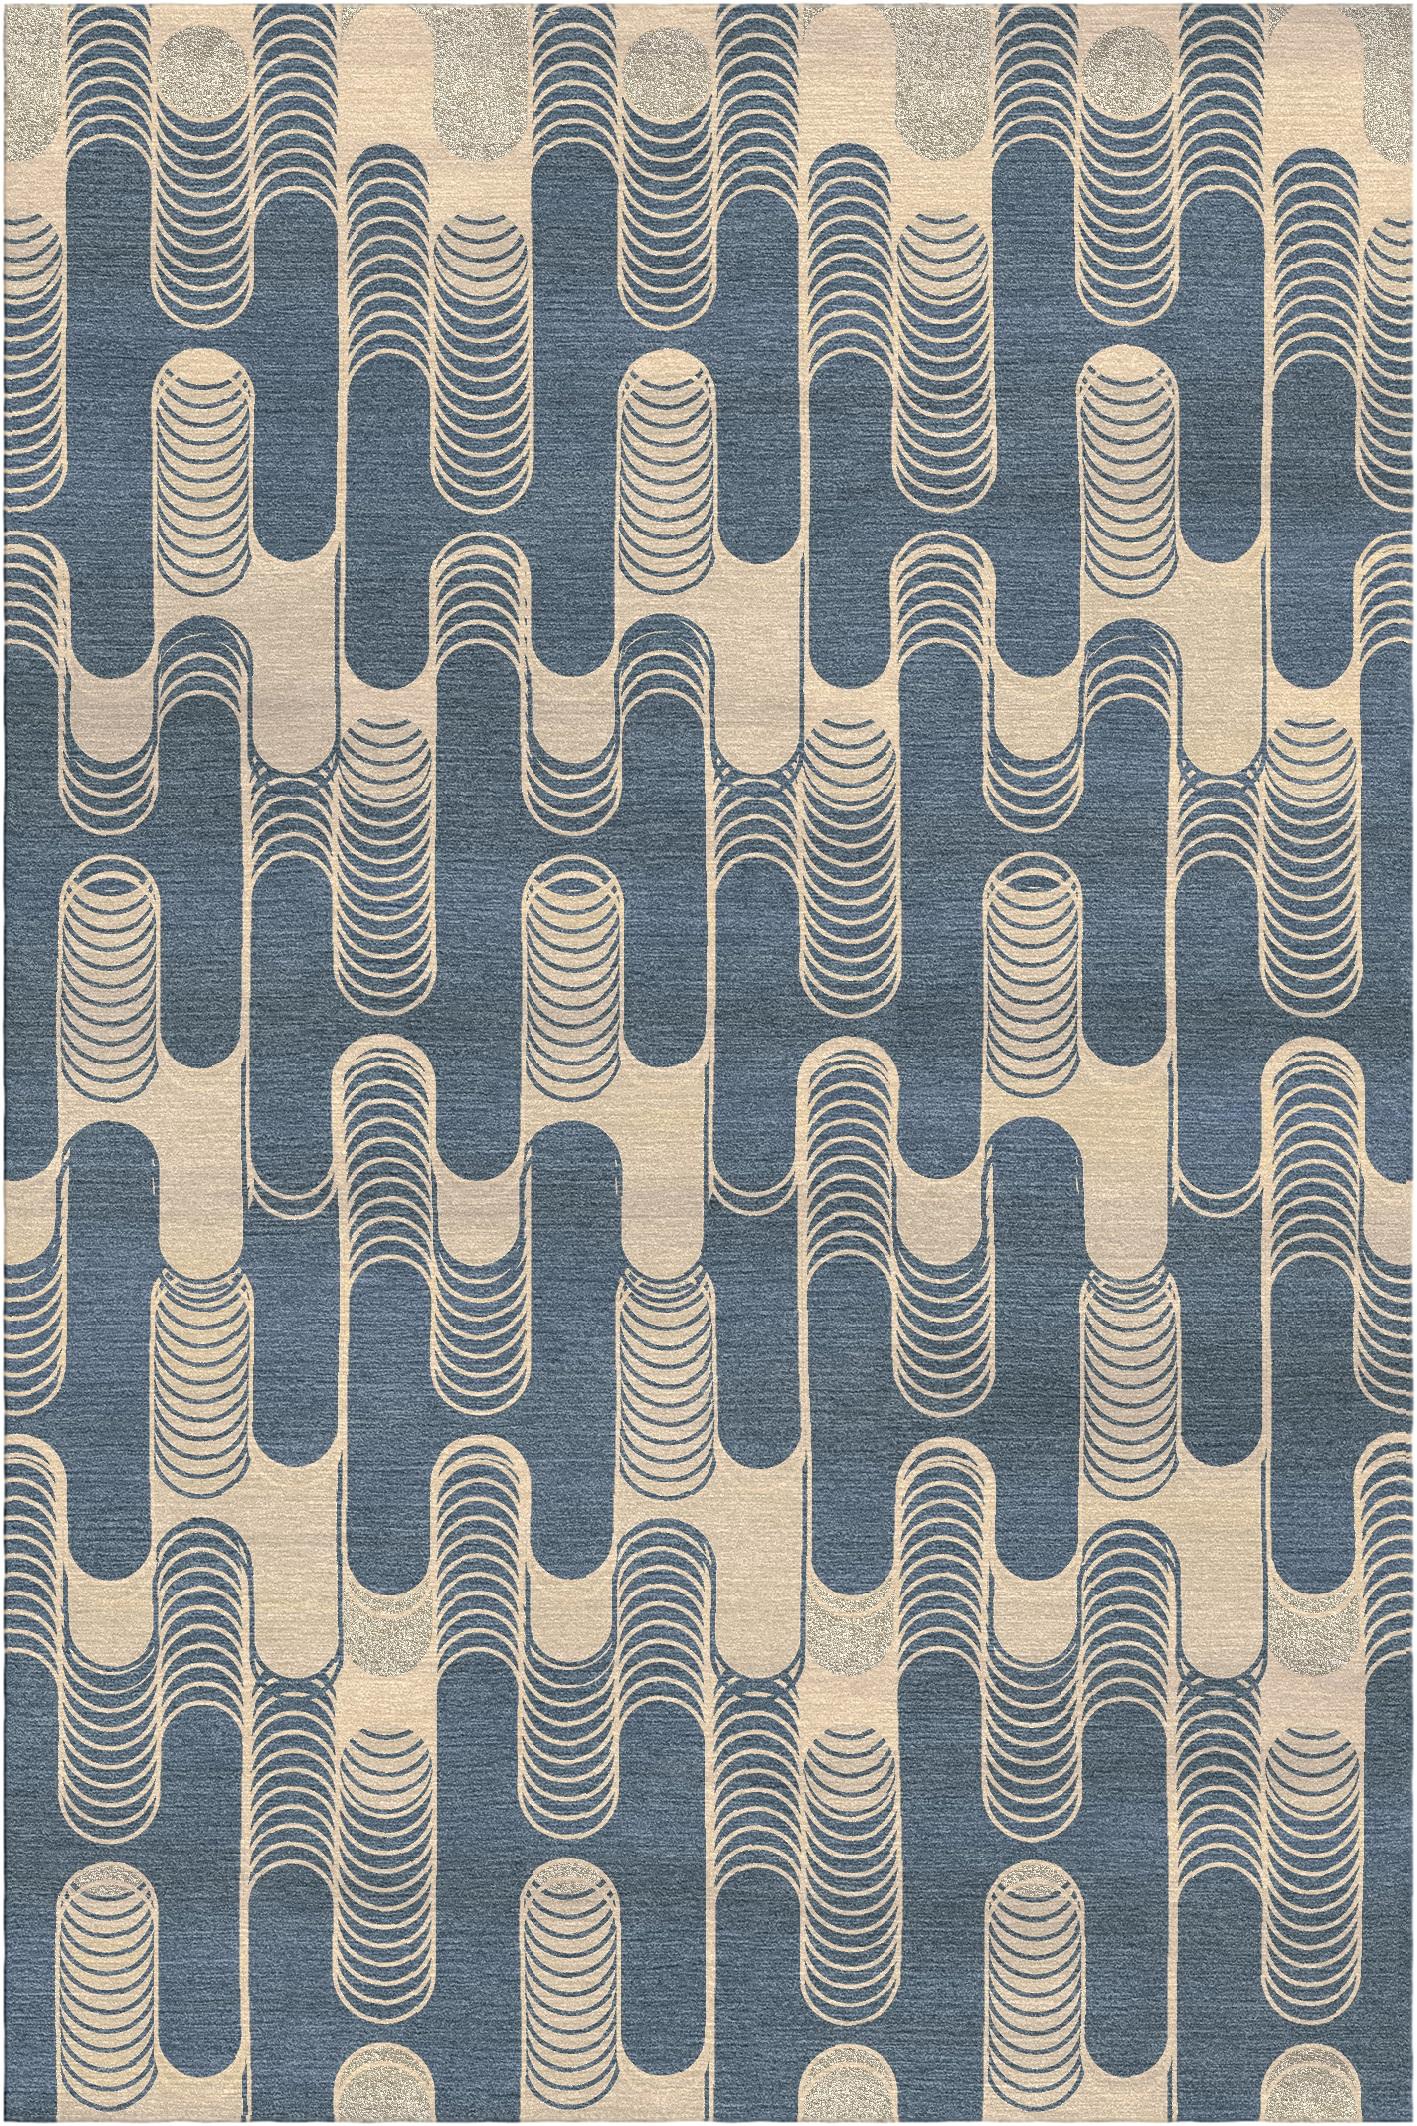 Settanta rug I by Giulio Brambilla
Dimensions: D 300 x W 200 x H 1.5 cm
Materials: NZ wool, bamboo silk
Available in other colors.

Boasting a modern geometric design of strong visual impact, this rug will make a singular statement in any